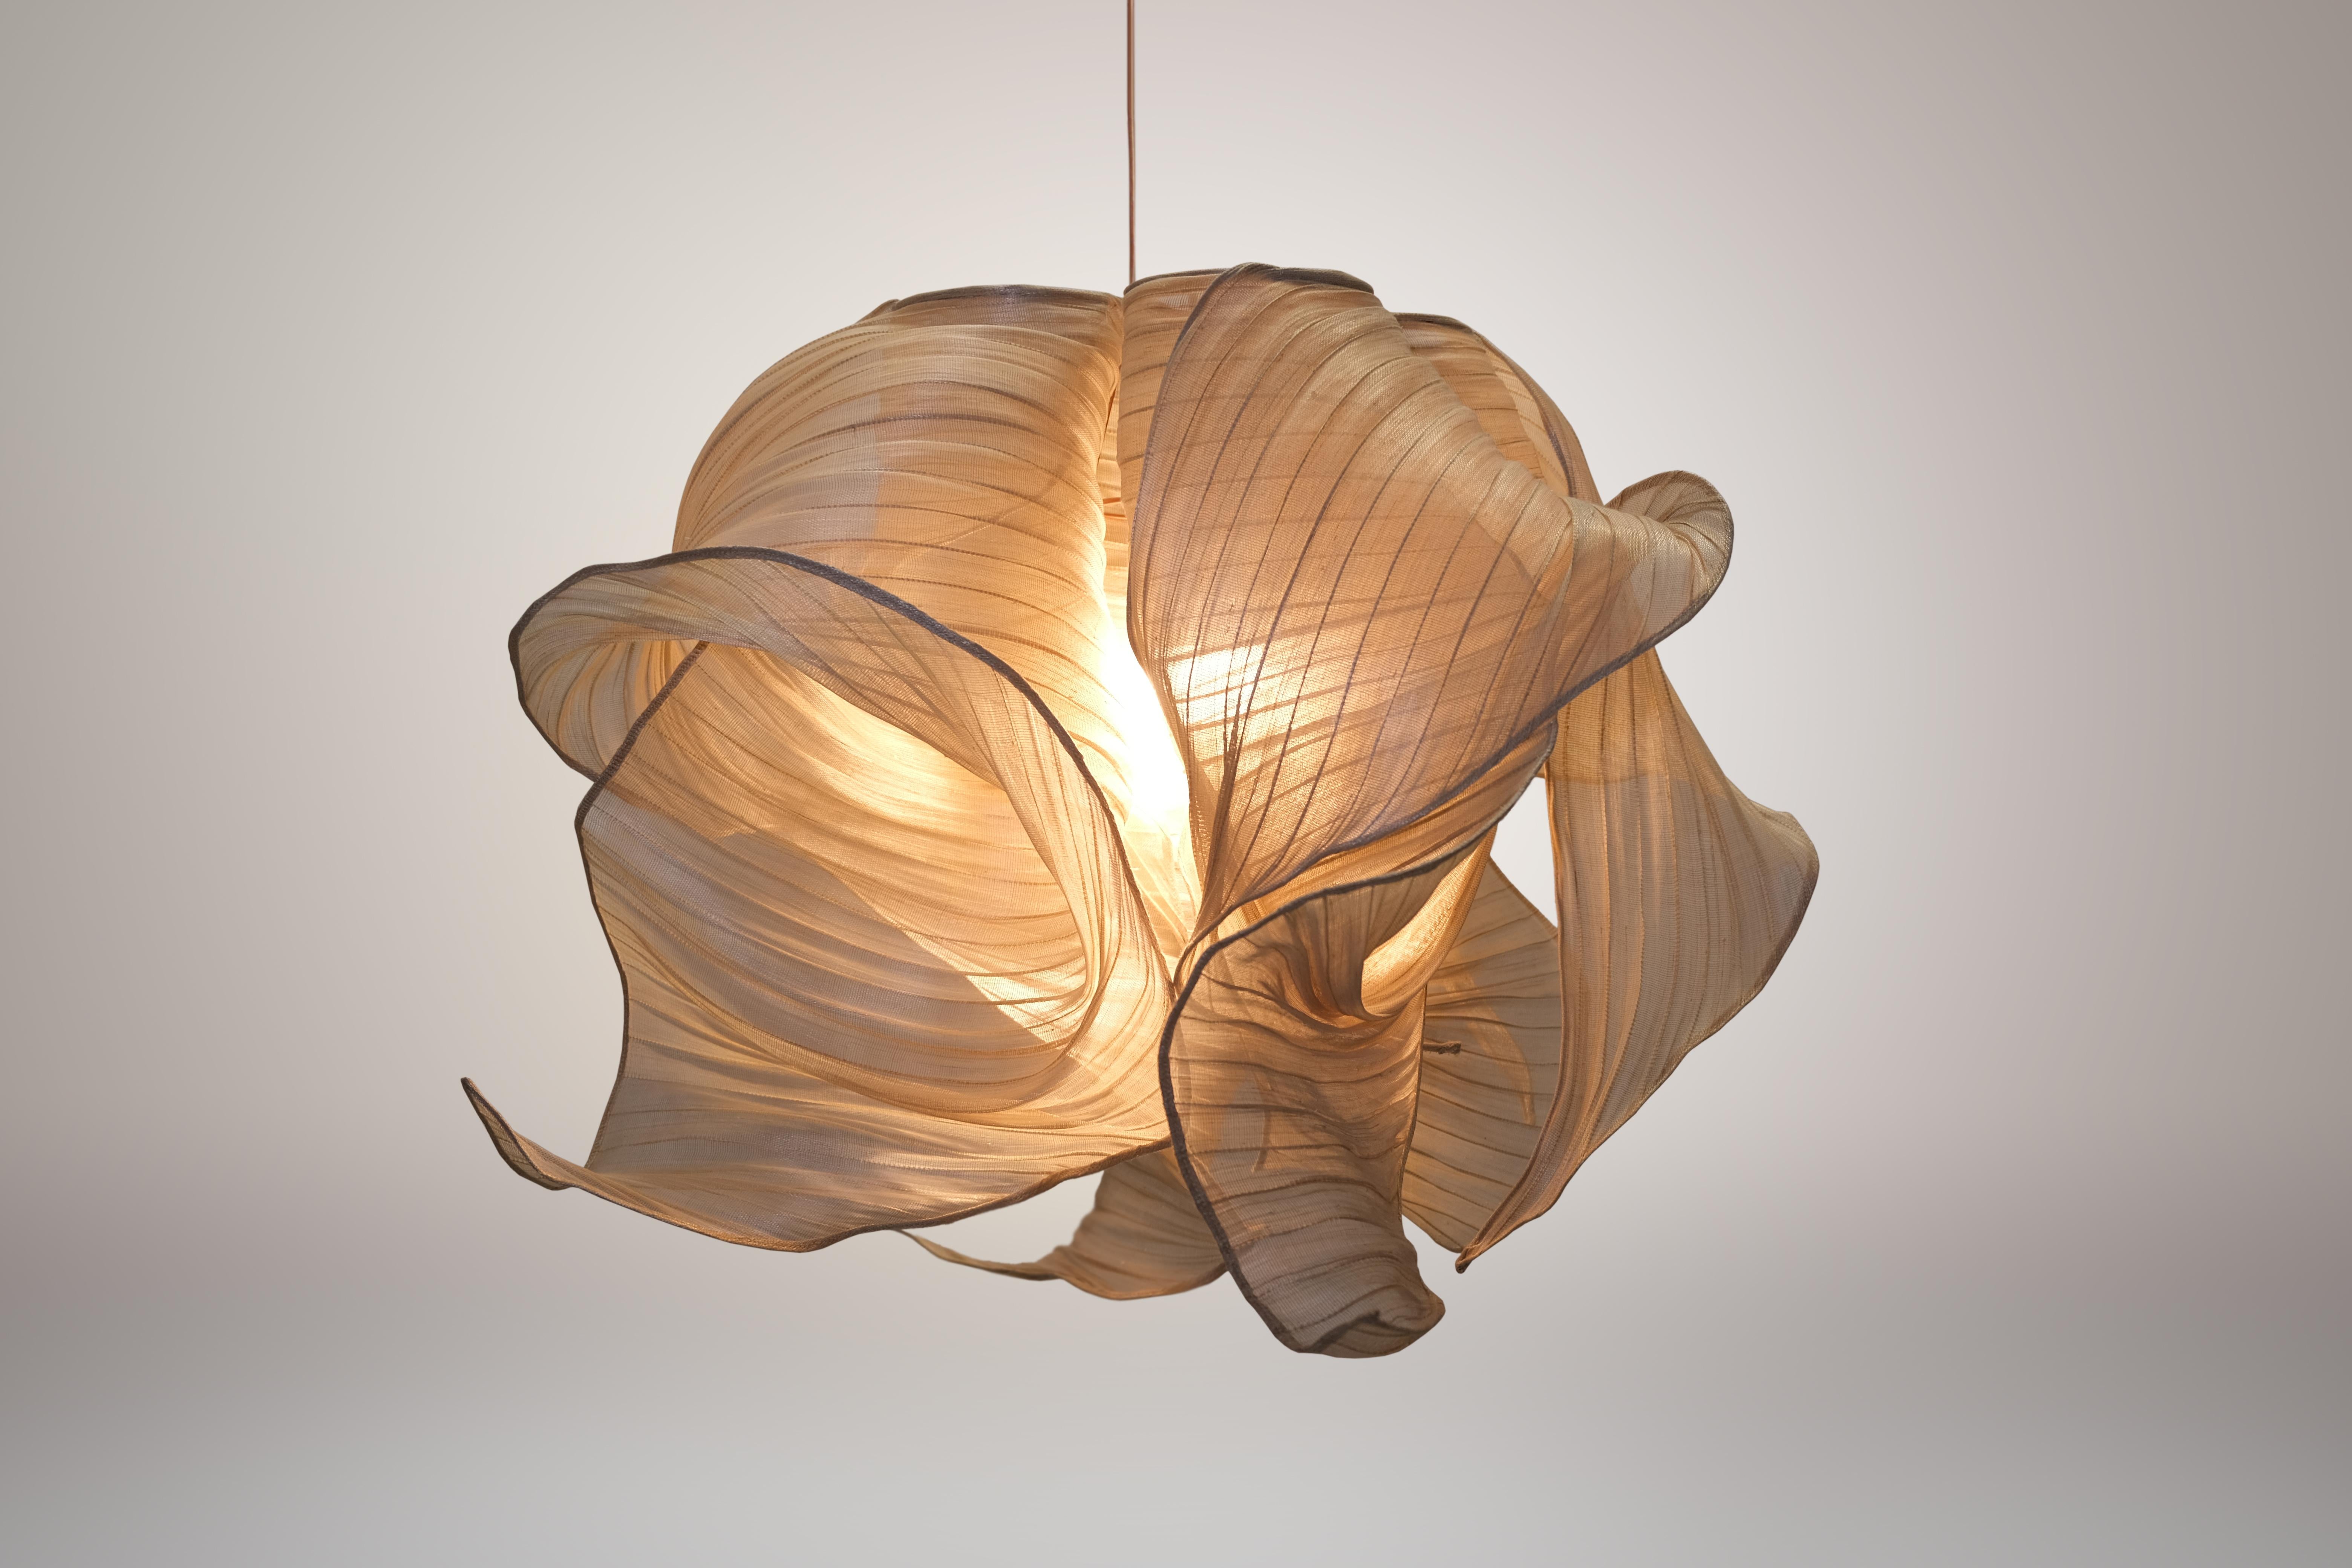 Natural Nebula pendant lamp by Mirei Monticelli
Dimensions: D 60 x W 60 x H 60 cm
Materials: Banaca fabric
Available in other colors.

Providing soft light in an organic and unique design, the Nebula Lamp draws its inspiration from the